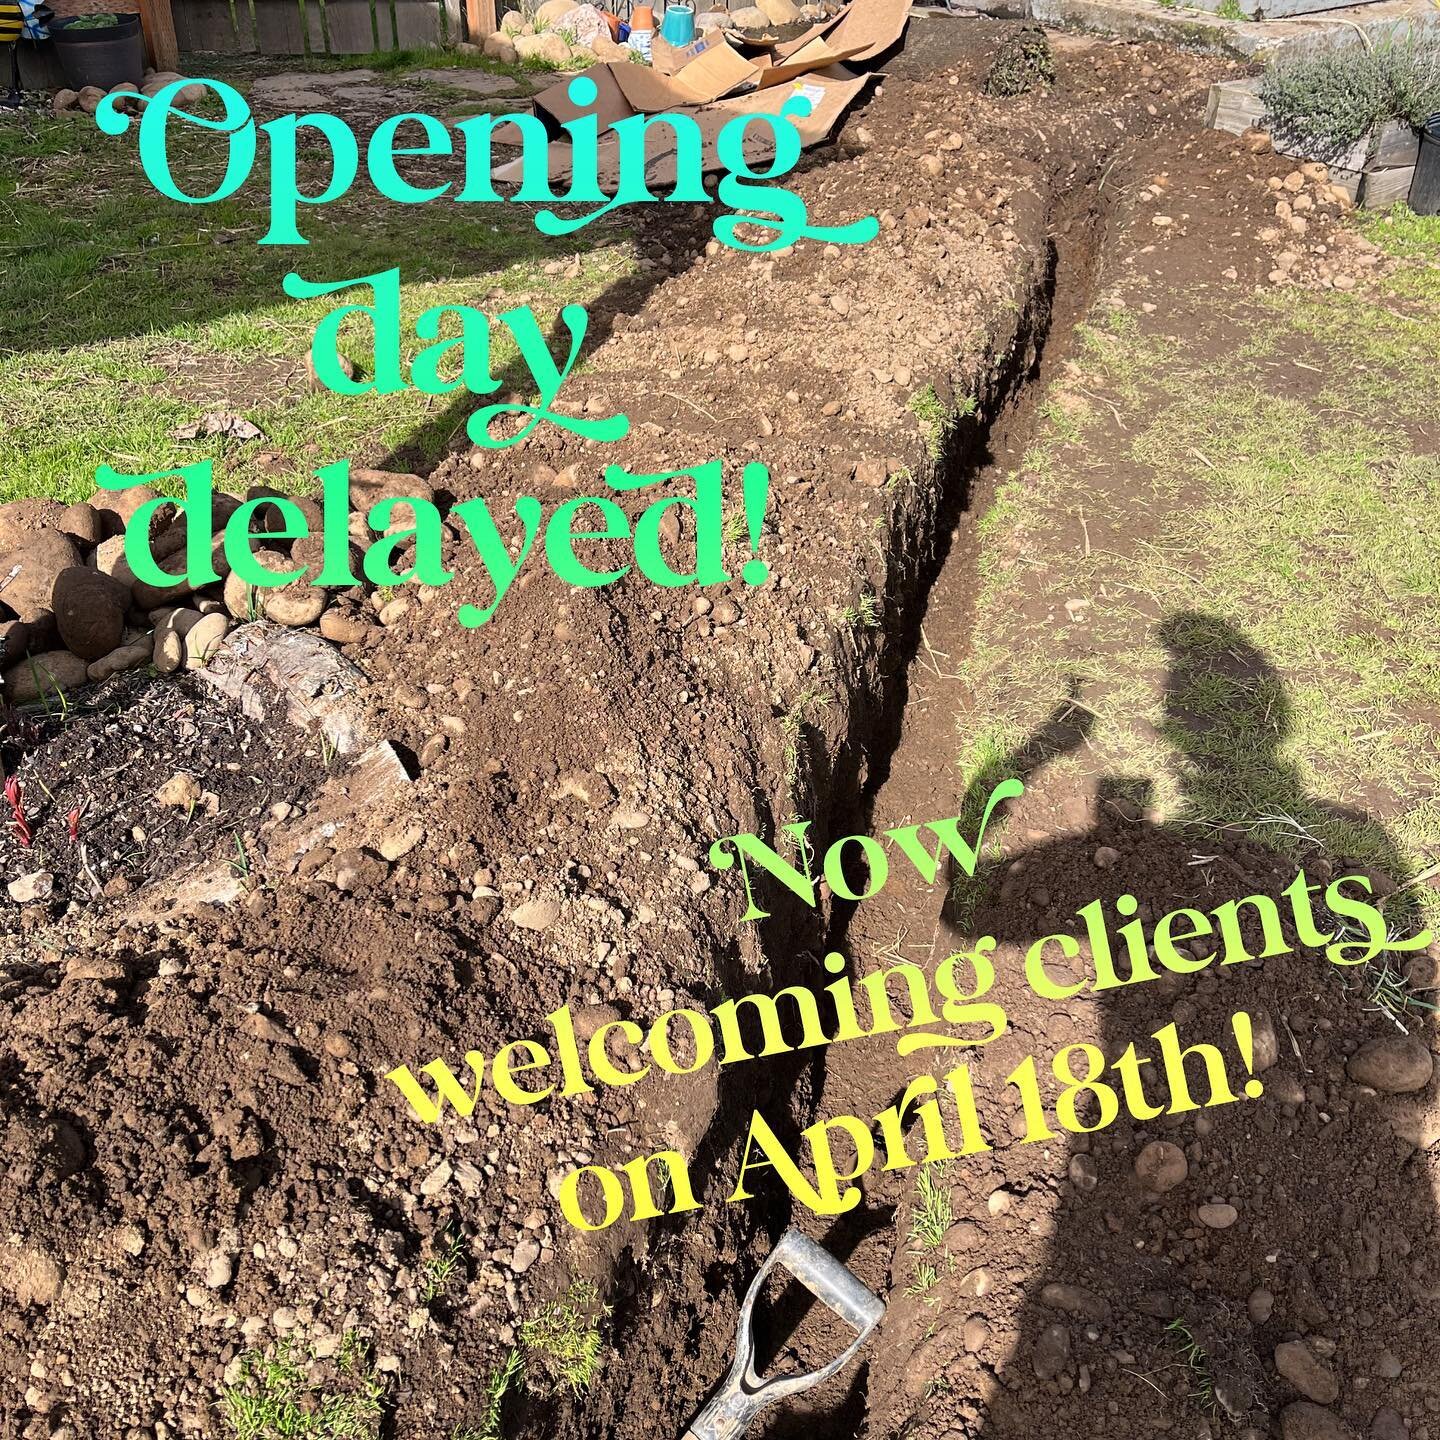 Well all, this last piece of construction is teaching me lessons of patience and flexibility. Today, I reflected and am recognizing opening day needs to be delayed a bit more. Learning concepts such as &ldquo;with one project starting you get 3 more&